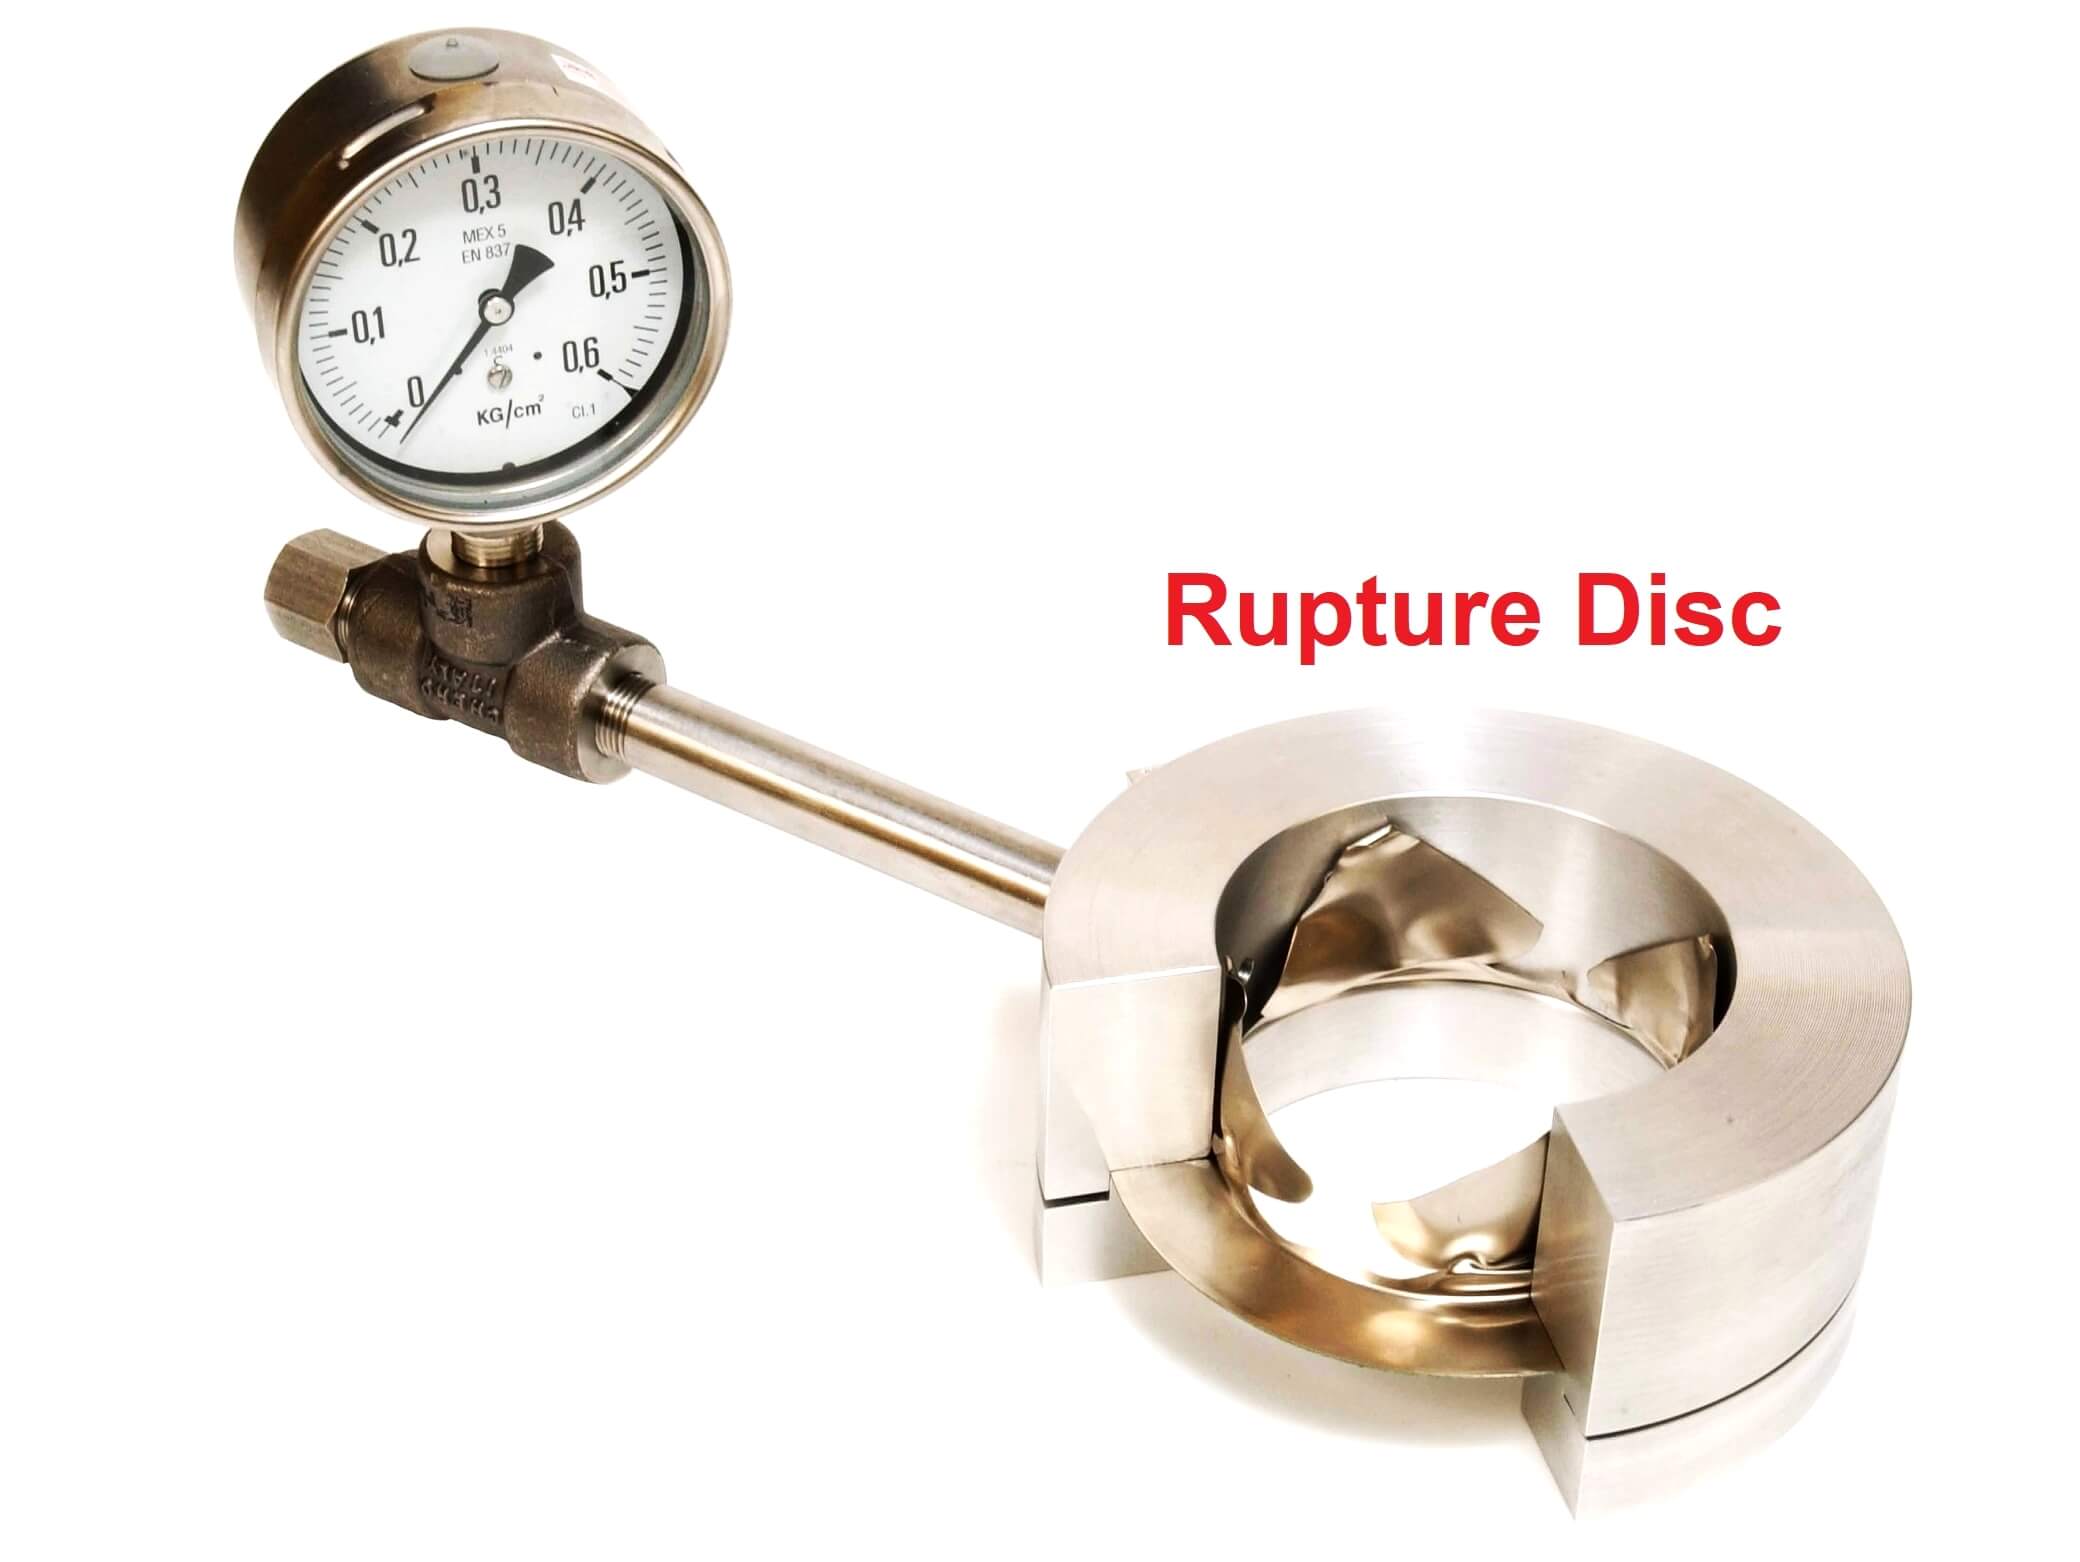 Why is a Rupture Disc Required